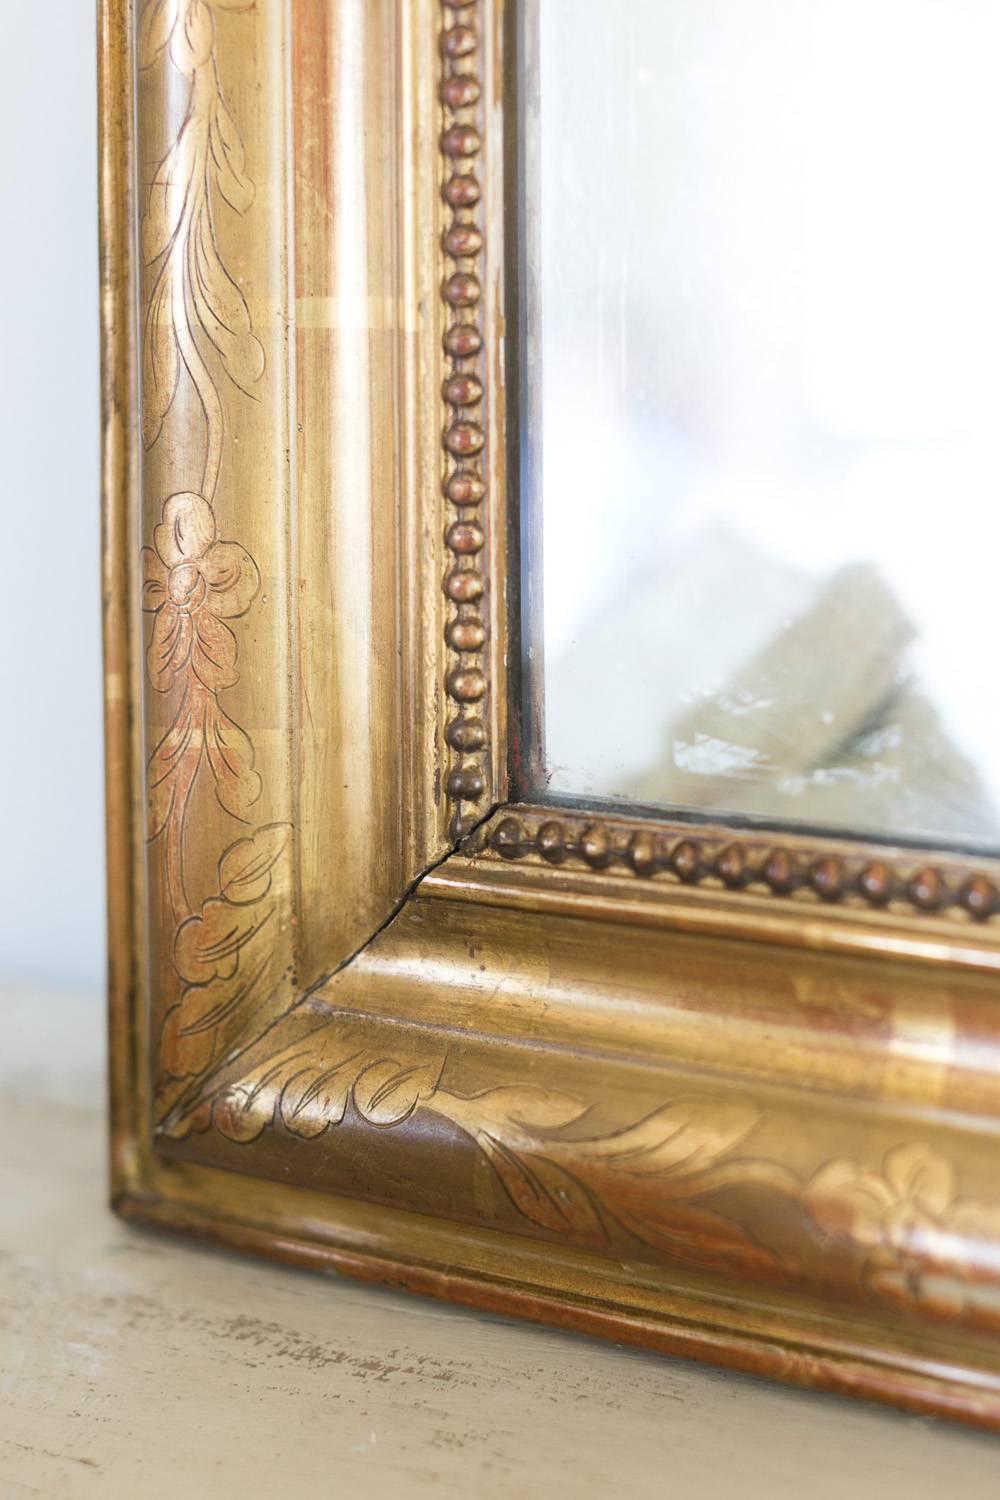 This Louis Philippe mirror features simple floral motif buttons where the glass connects. The gorgeous piece in muted gilt rubs back to umber red in the distressed frame decorated with subtle etchings. Light chipping in the corners and the